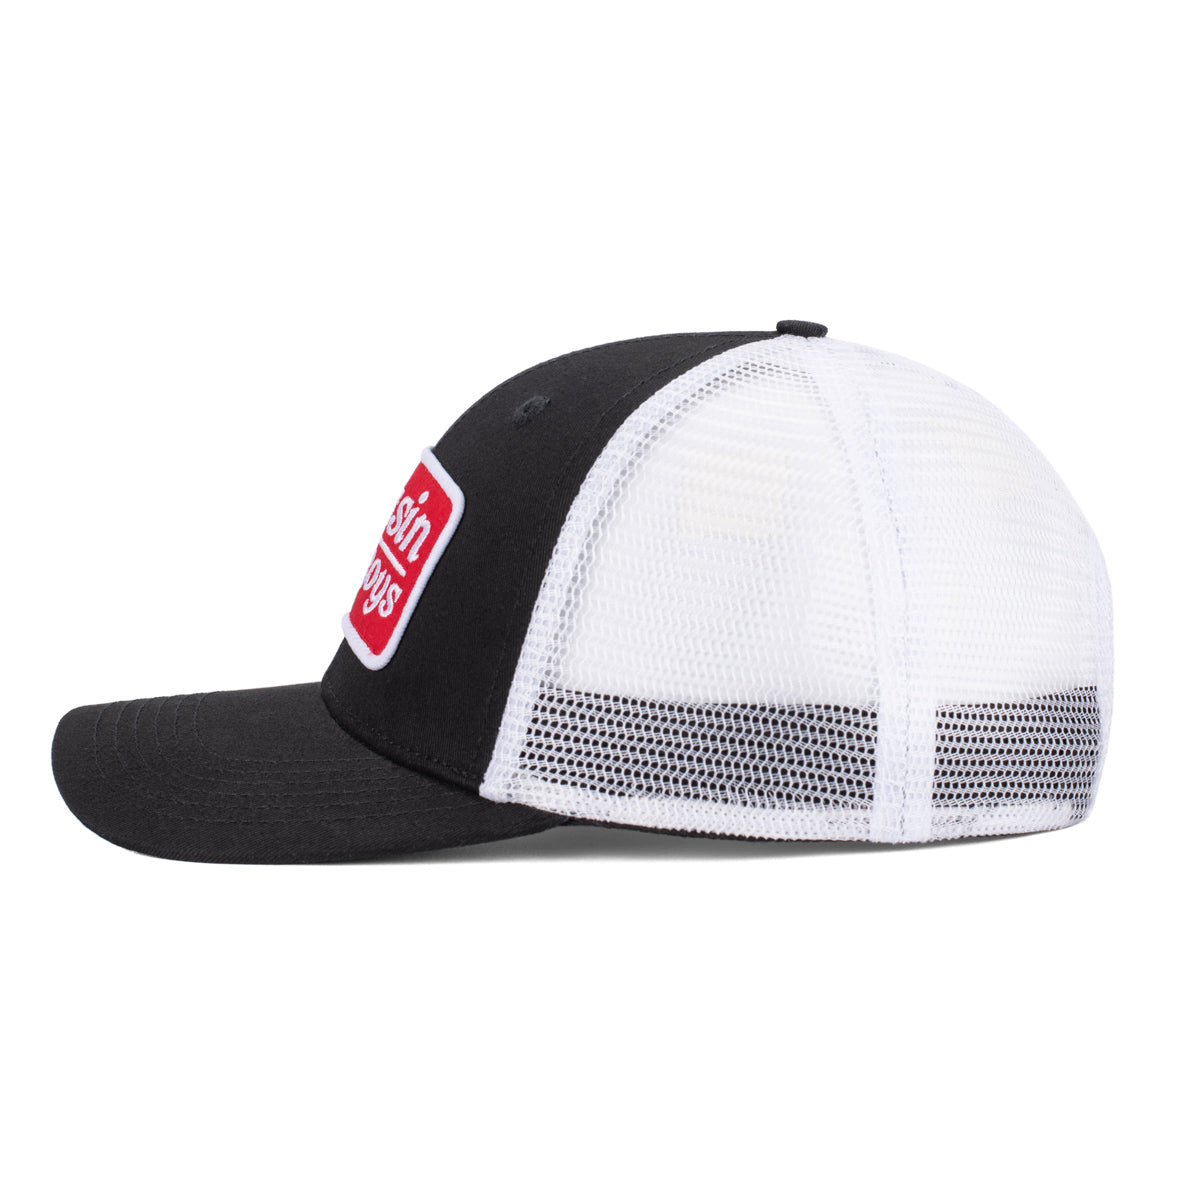 Bussin With The Boys Patch Trucker Hat III-Hats-Bussin With The Boys-Black-One Size-Barstool Sports